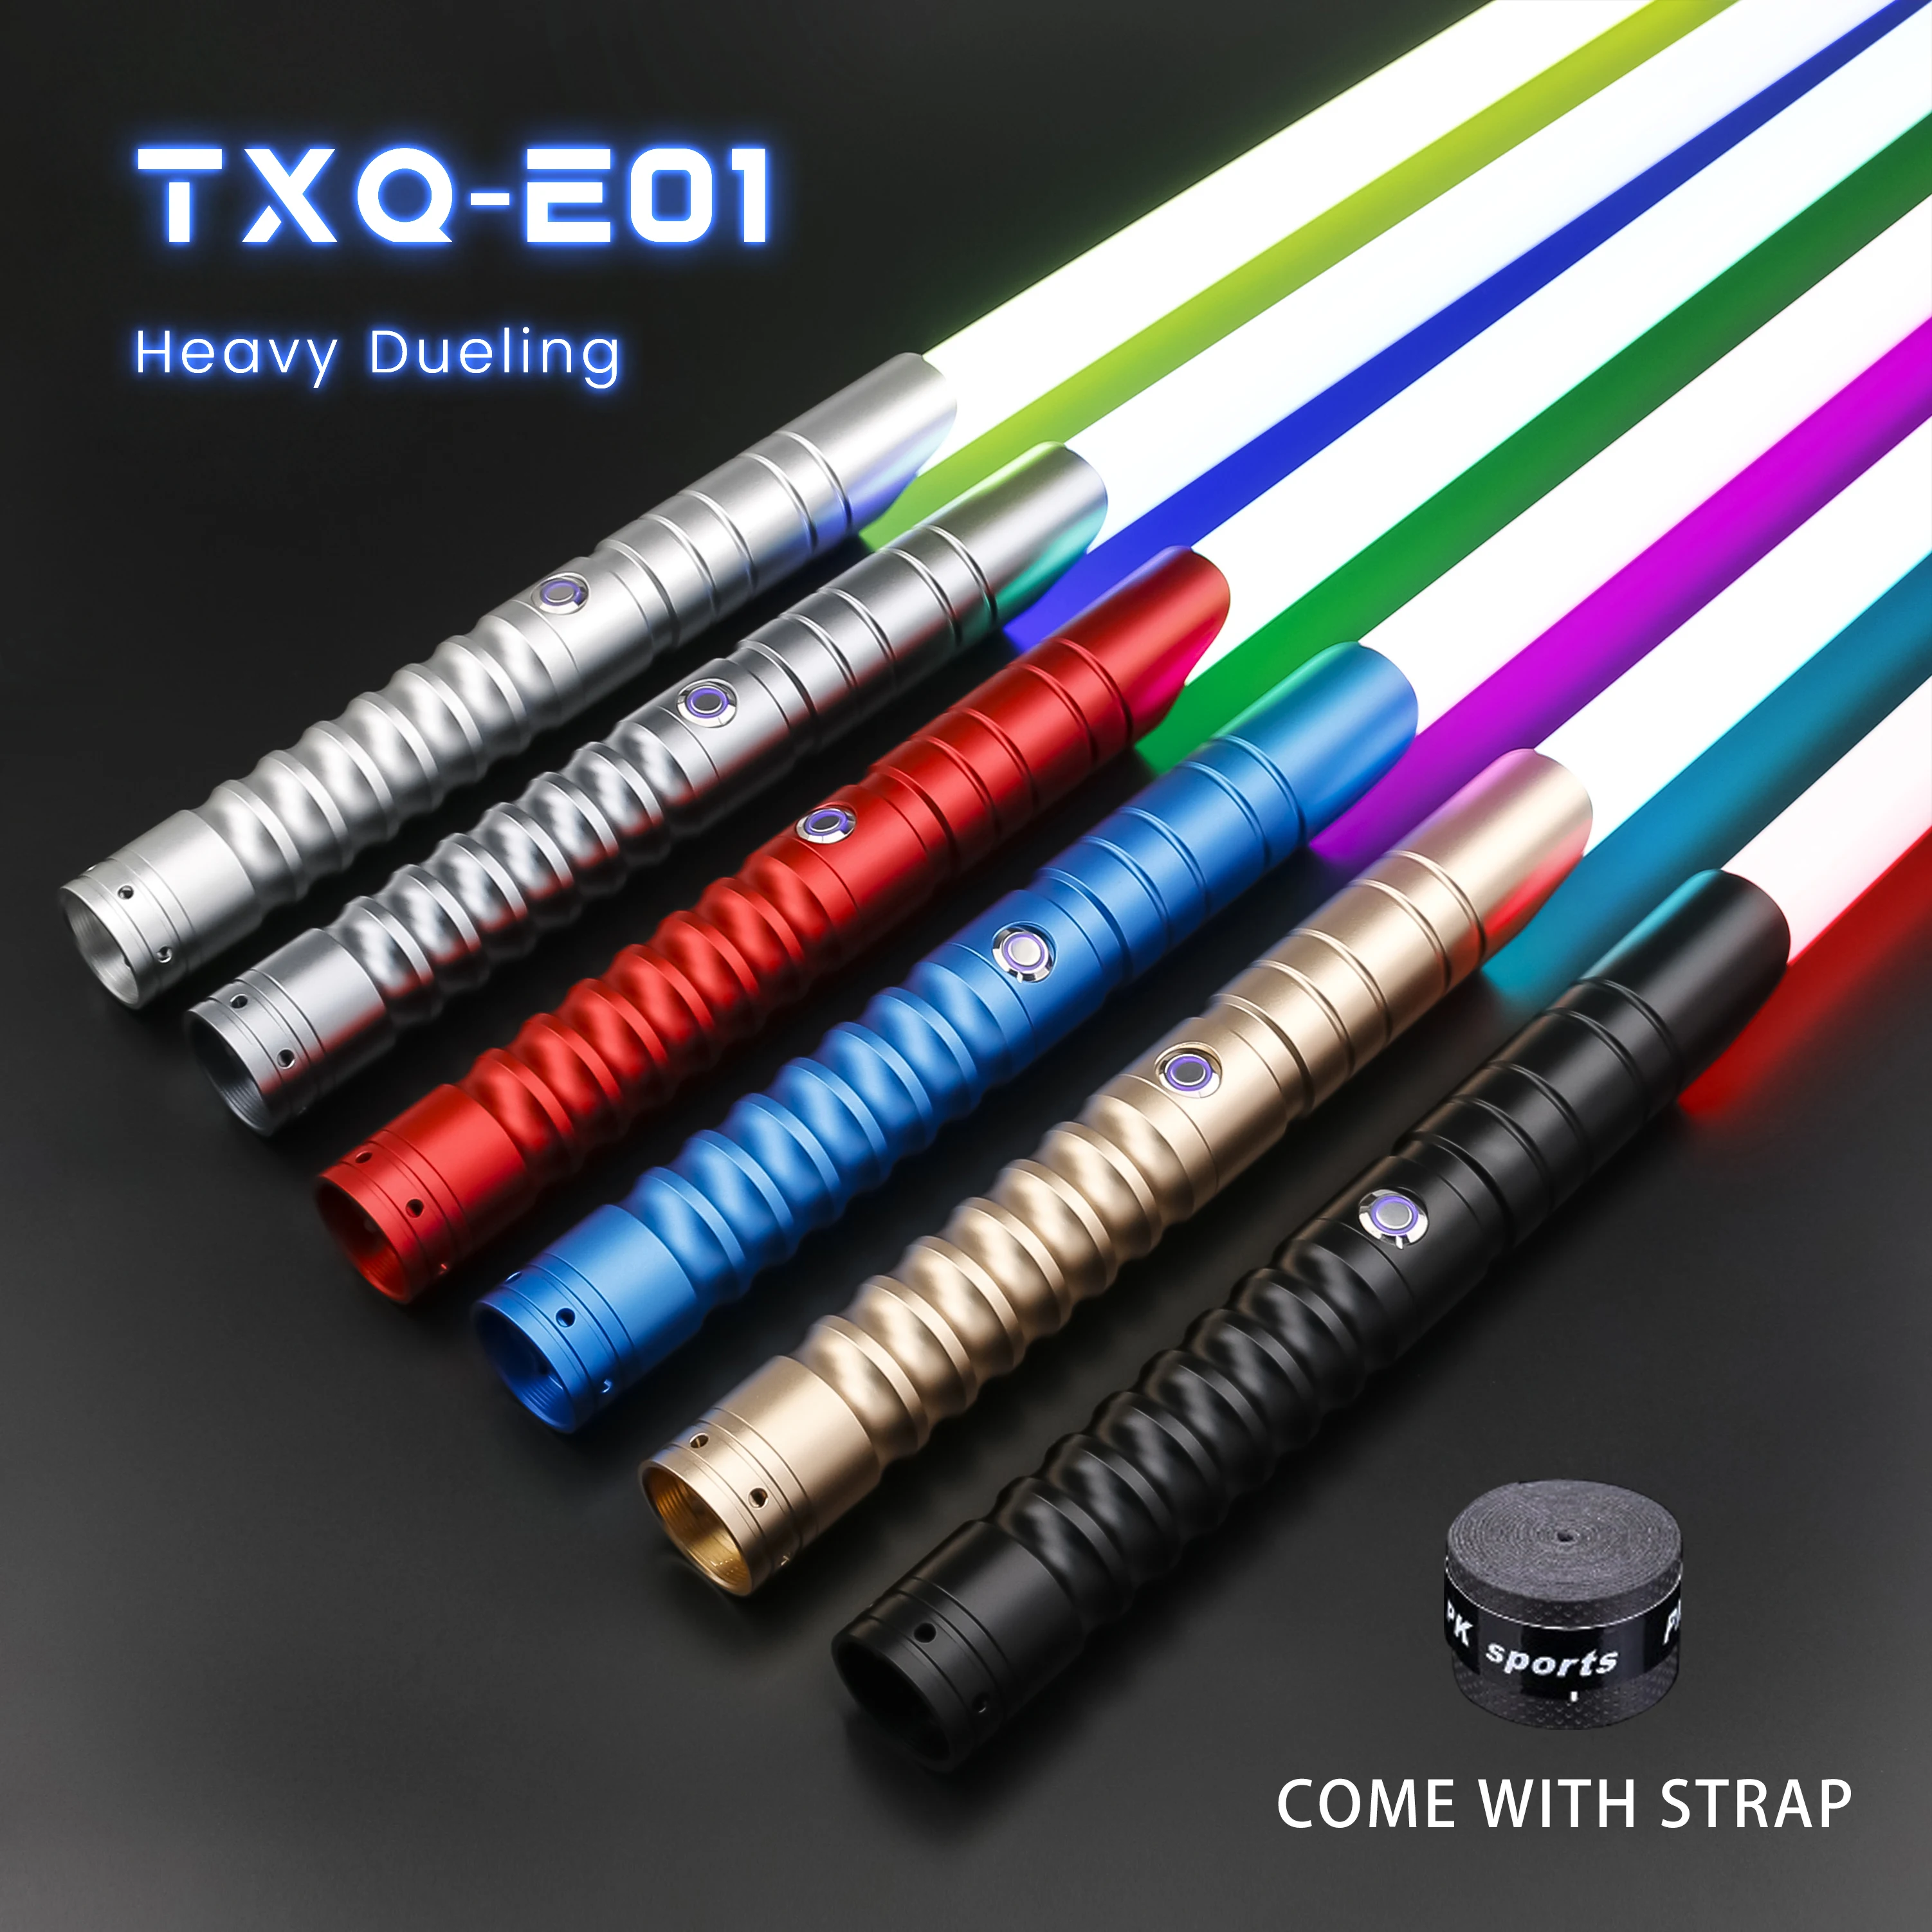 txqsaber-rgb-neo-pixel-lightsaber-smooth-swing-heavy-dueling-jedi-training-laser-sword-metal-hilt-12-colors-change-cosplay-toys